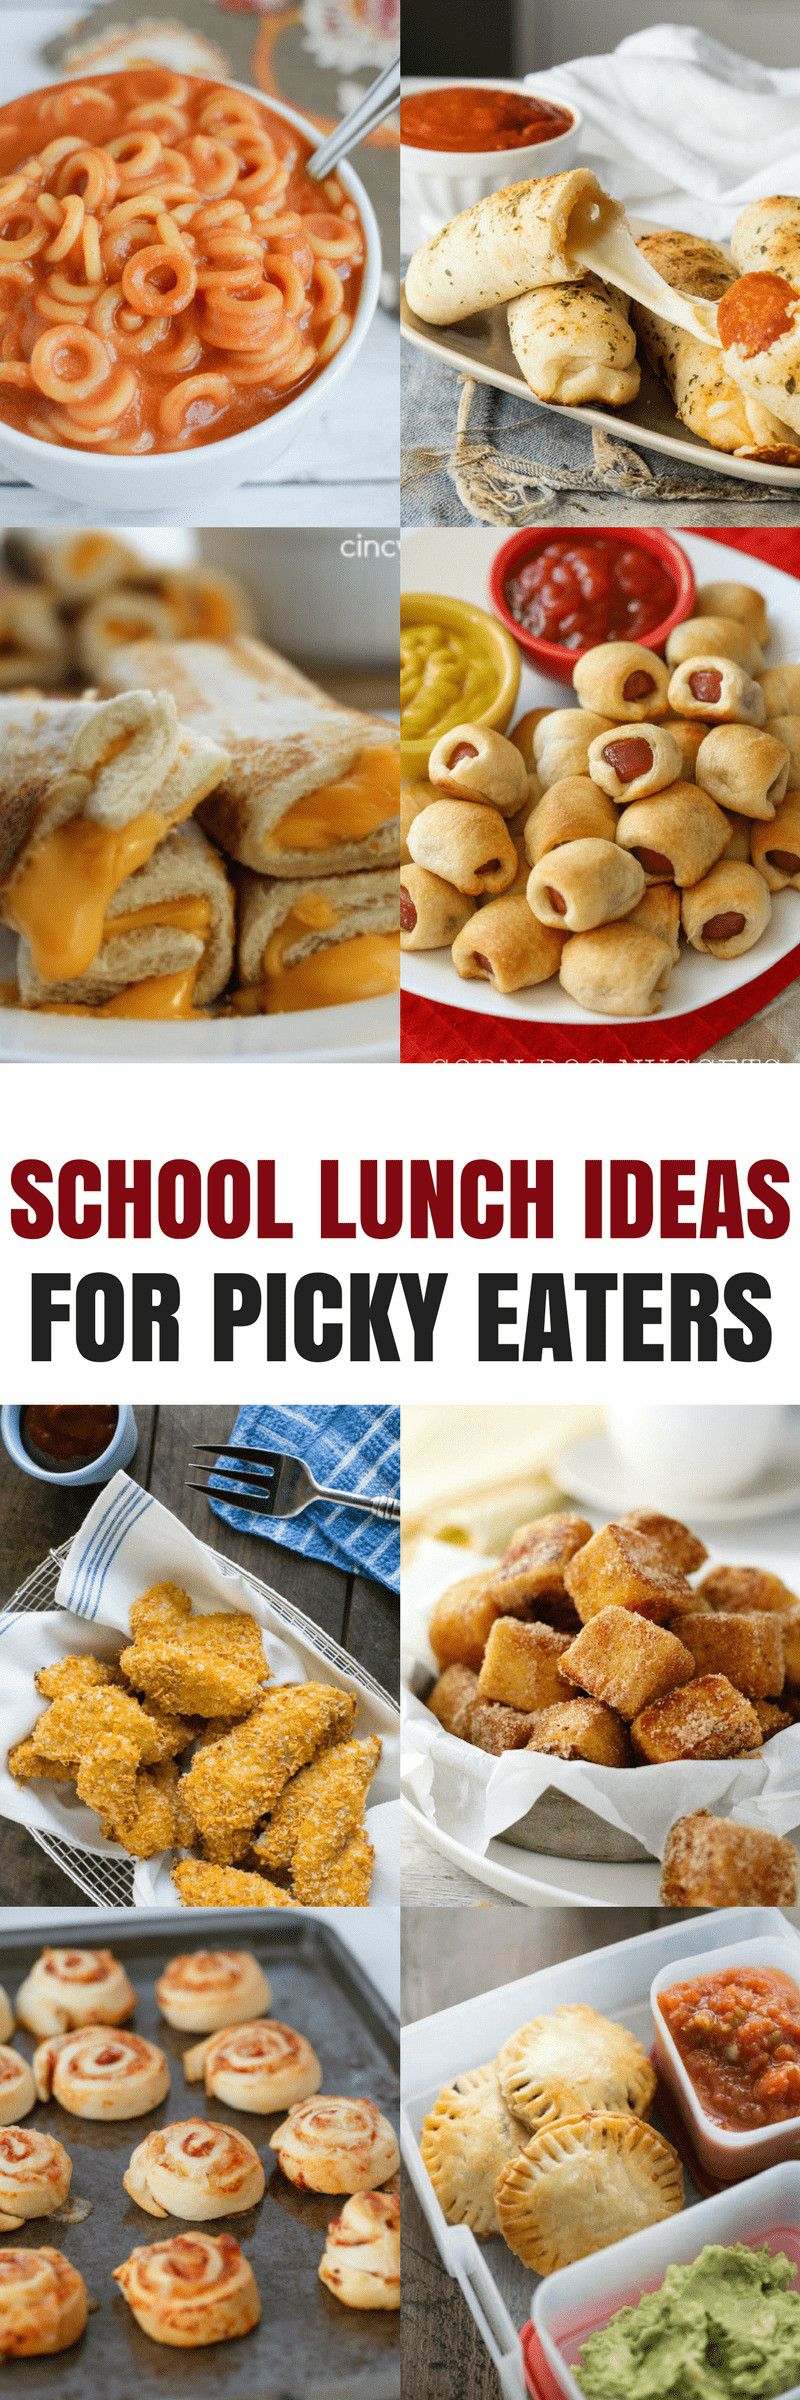 Heart Healthy Recipes For Picky Eaters
 School Lunch Ideas for Picky Eaters A Grande Life